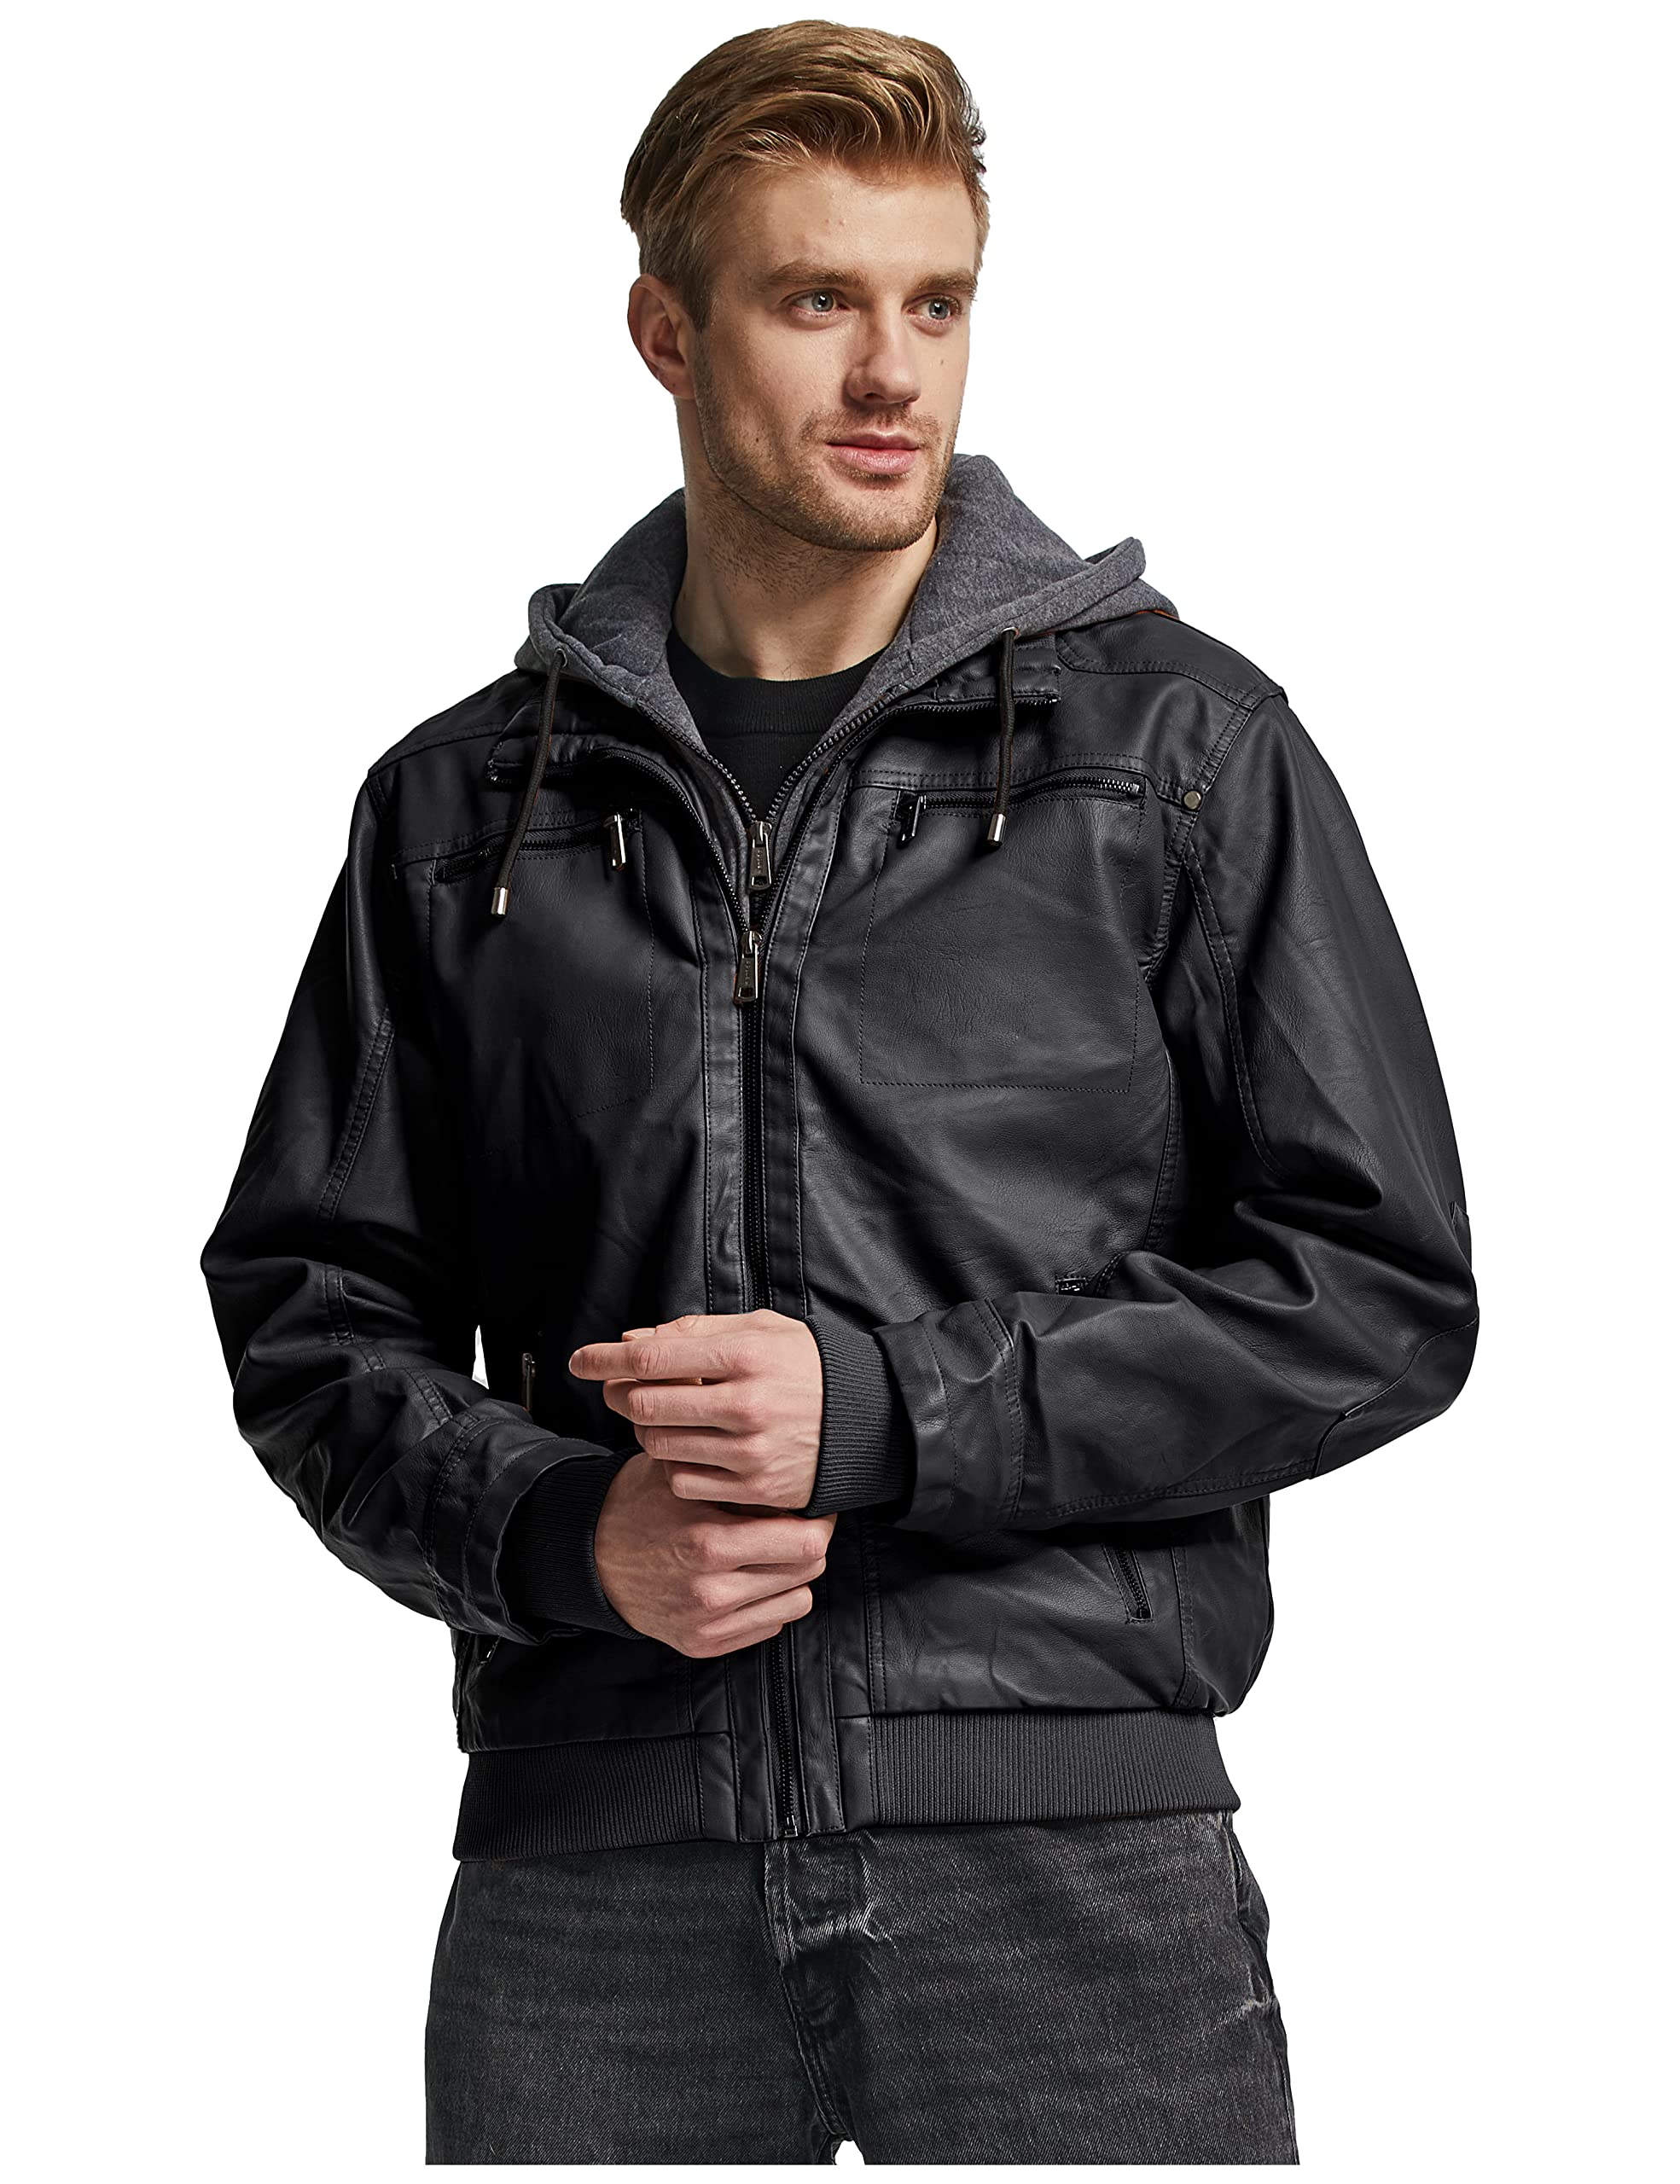 Wantdo Men's Faux Leather Jacket with Removable Hood Motorcycle Jacket Casual Warm Winter Coat